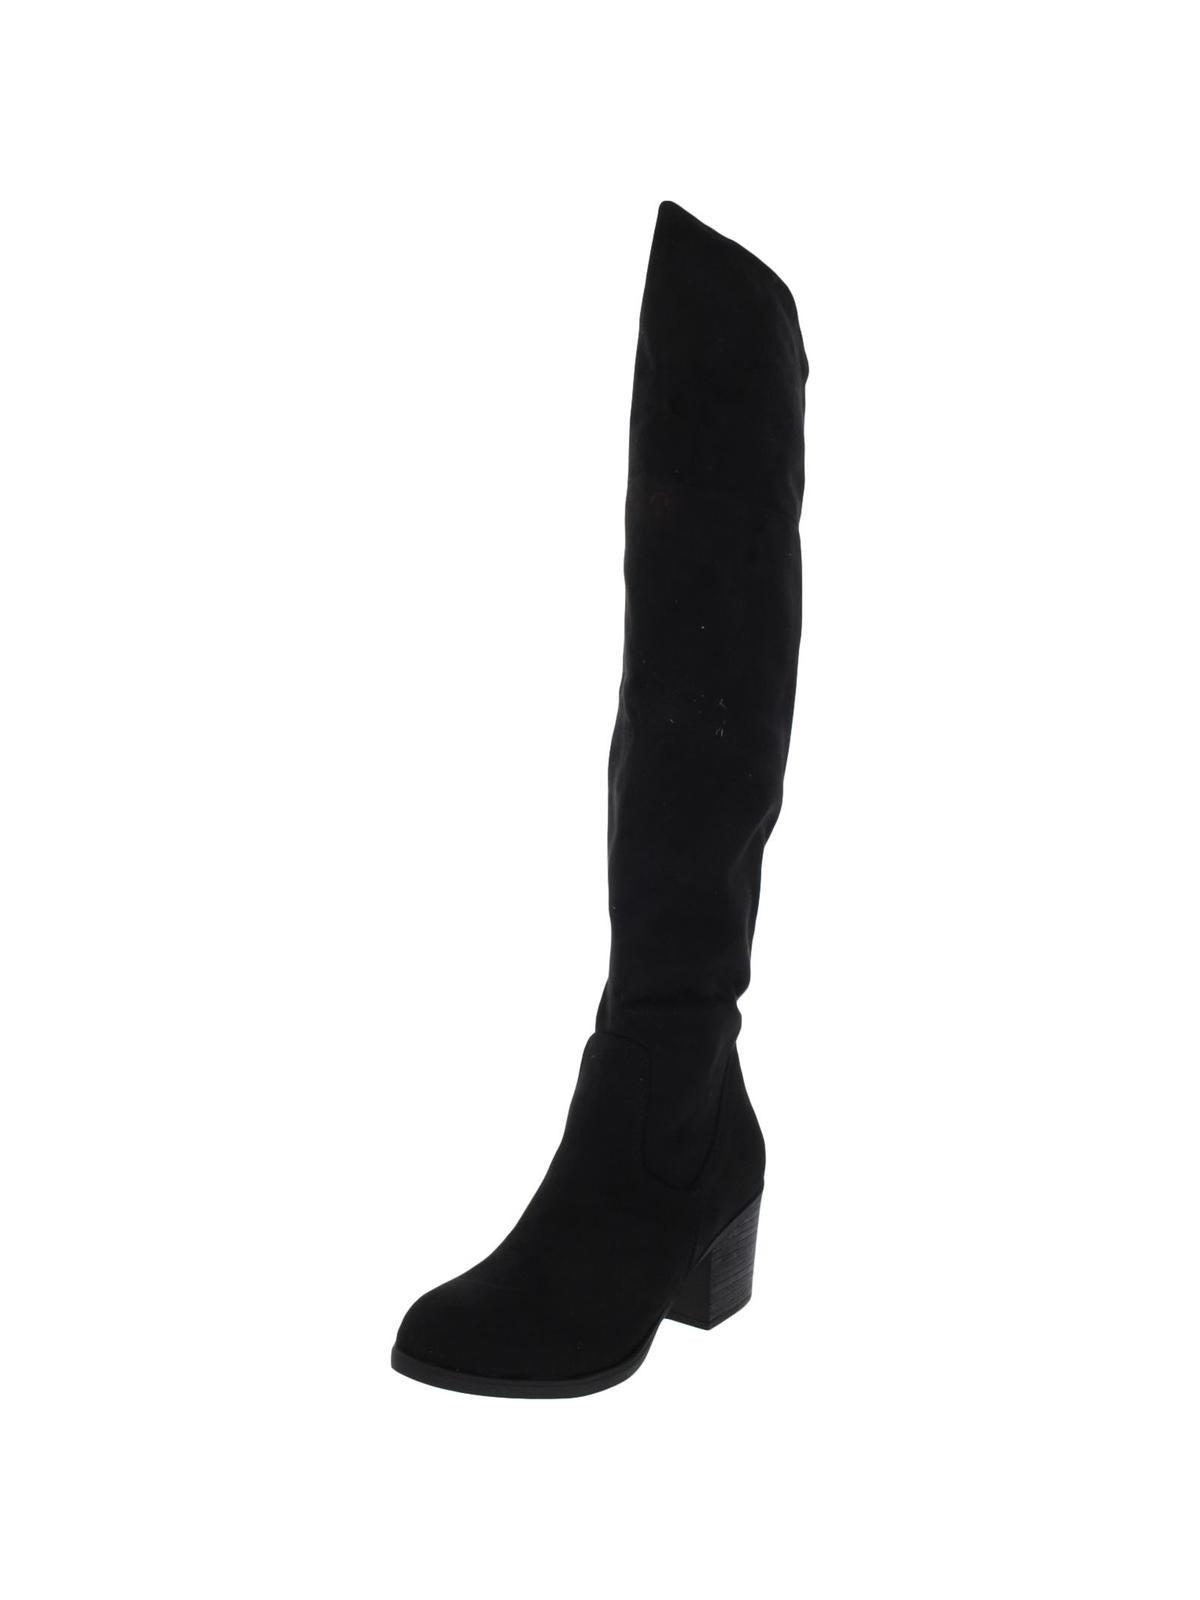 Journee Collection Sana Wide Calf Tall Over-the-knee Boots in Black | Lyst